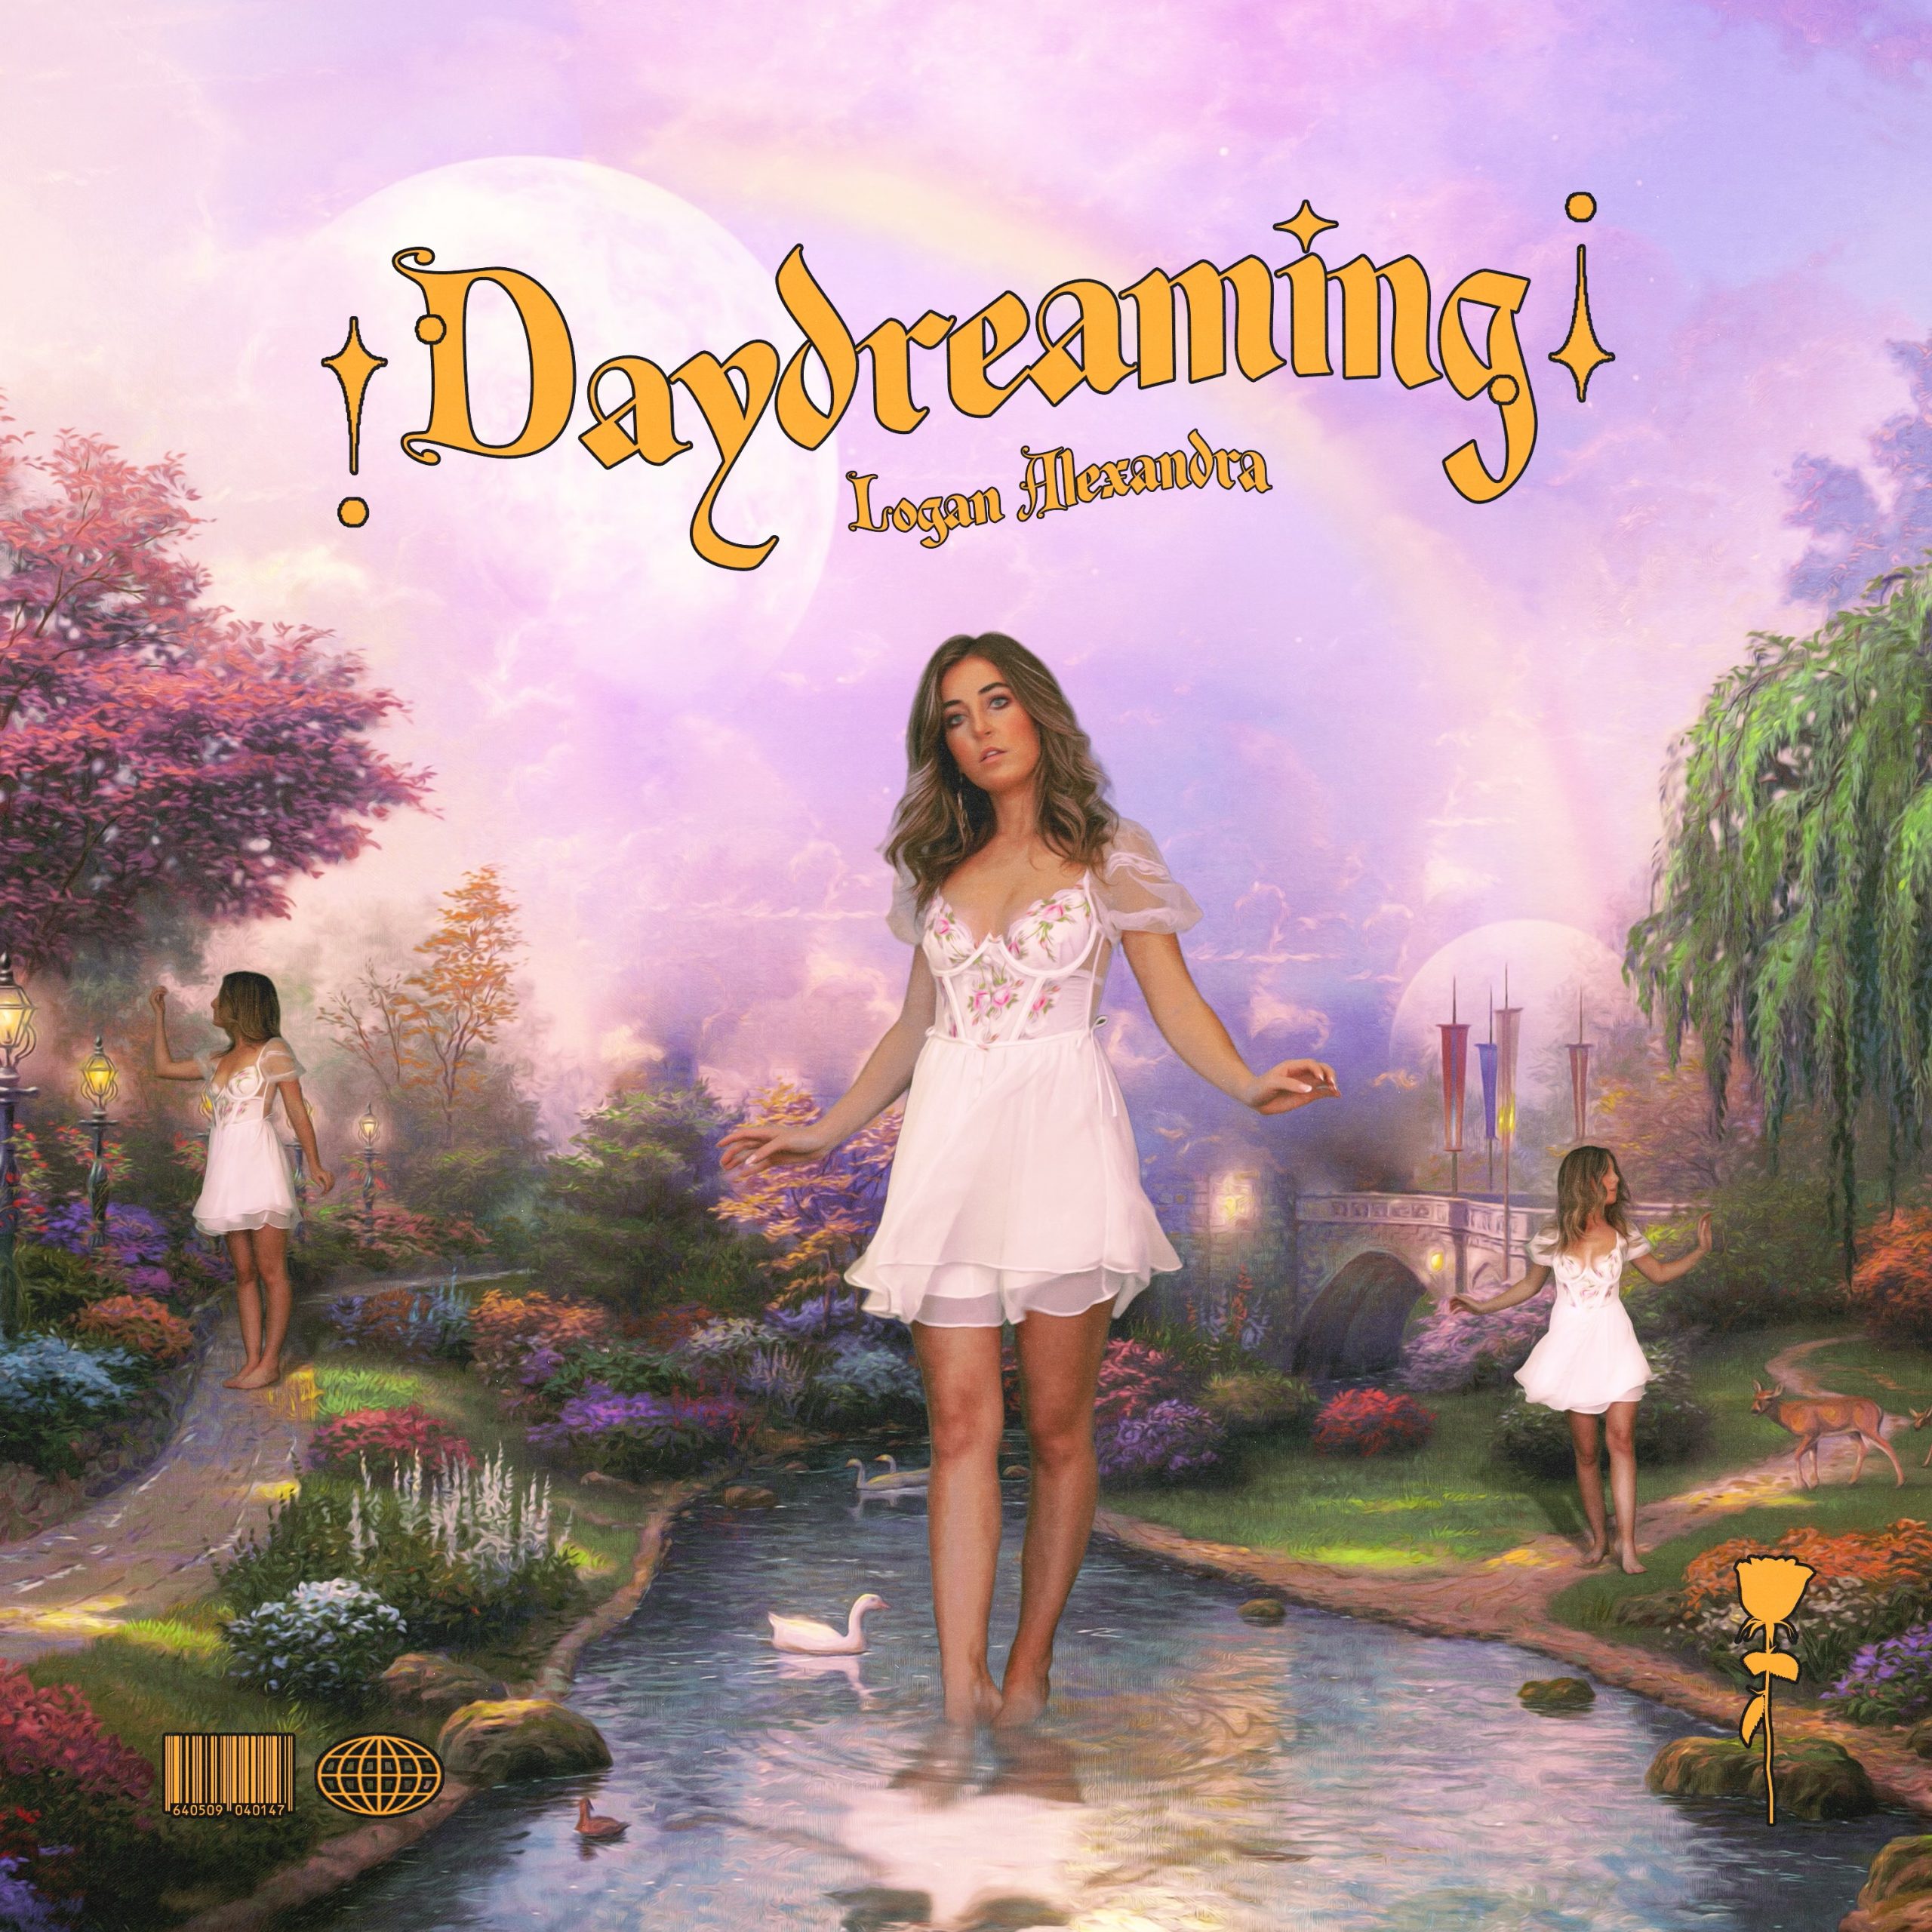 ‘Logan Alexandra’ is pictured dancing and singing in an almost fantasy-laced world that incites a feeling of euphoria in new video ‘Daydreaming’